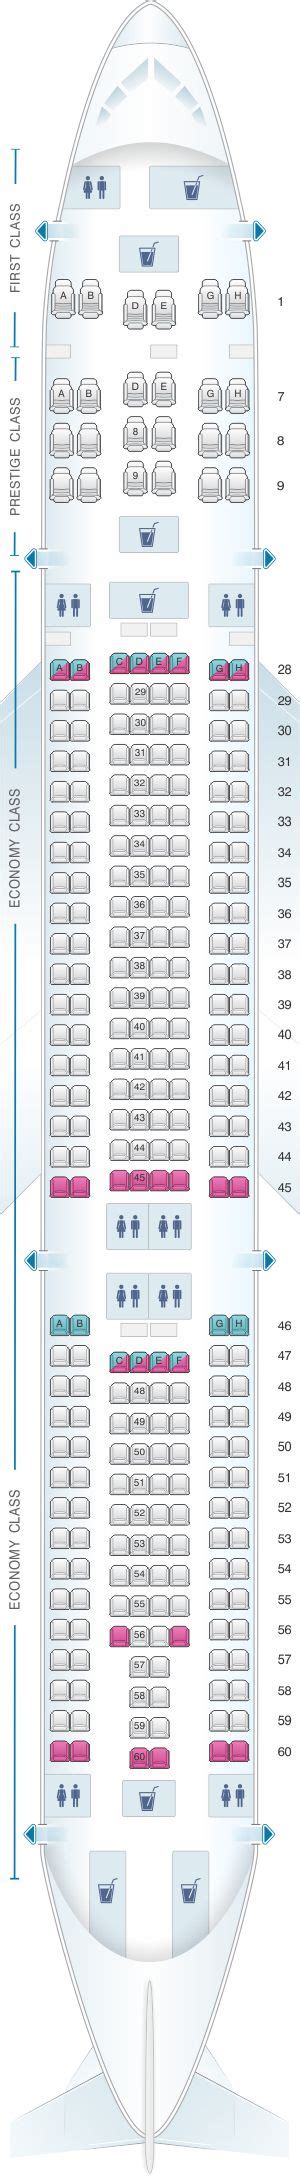 Seat Map Korean Air Airbus A330 300 276pax China Eastern Airlines